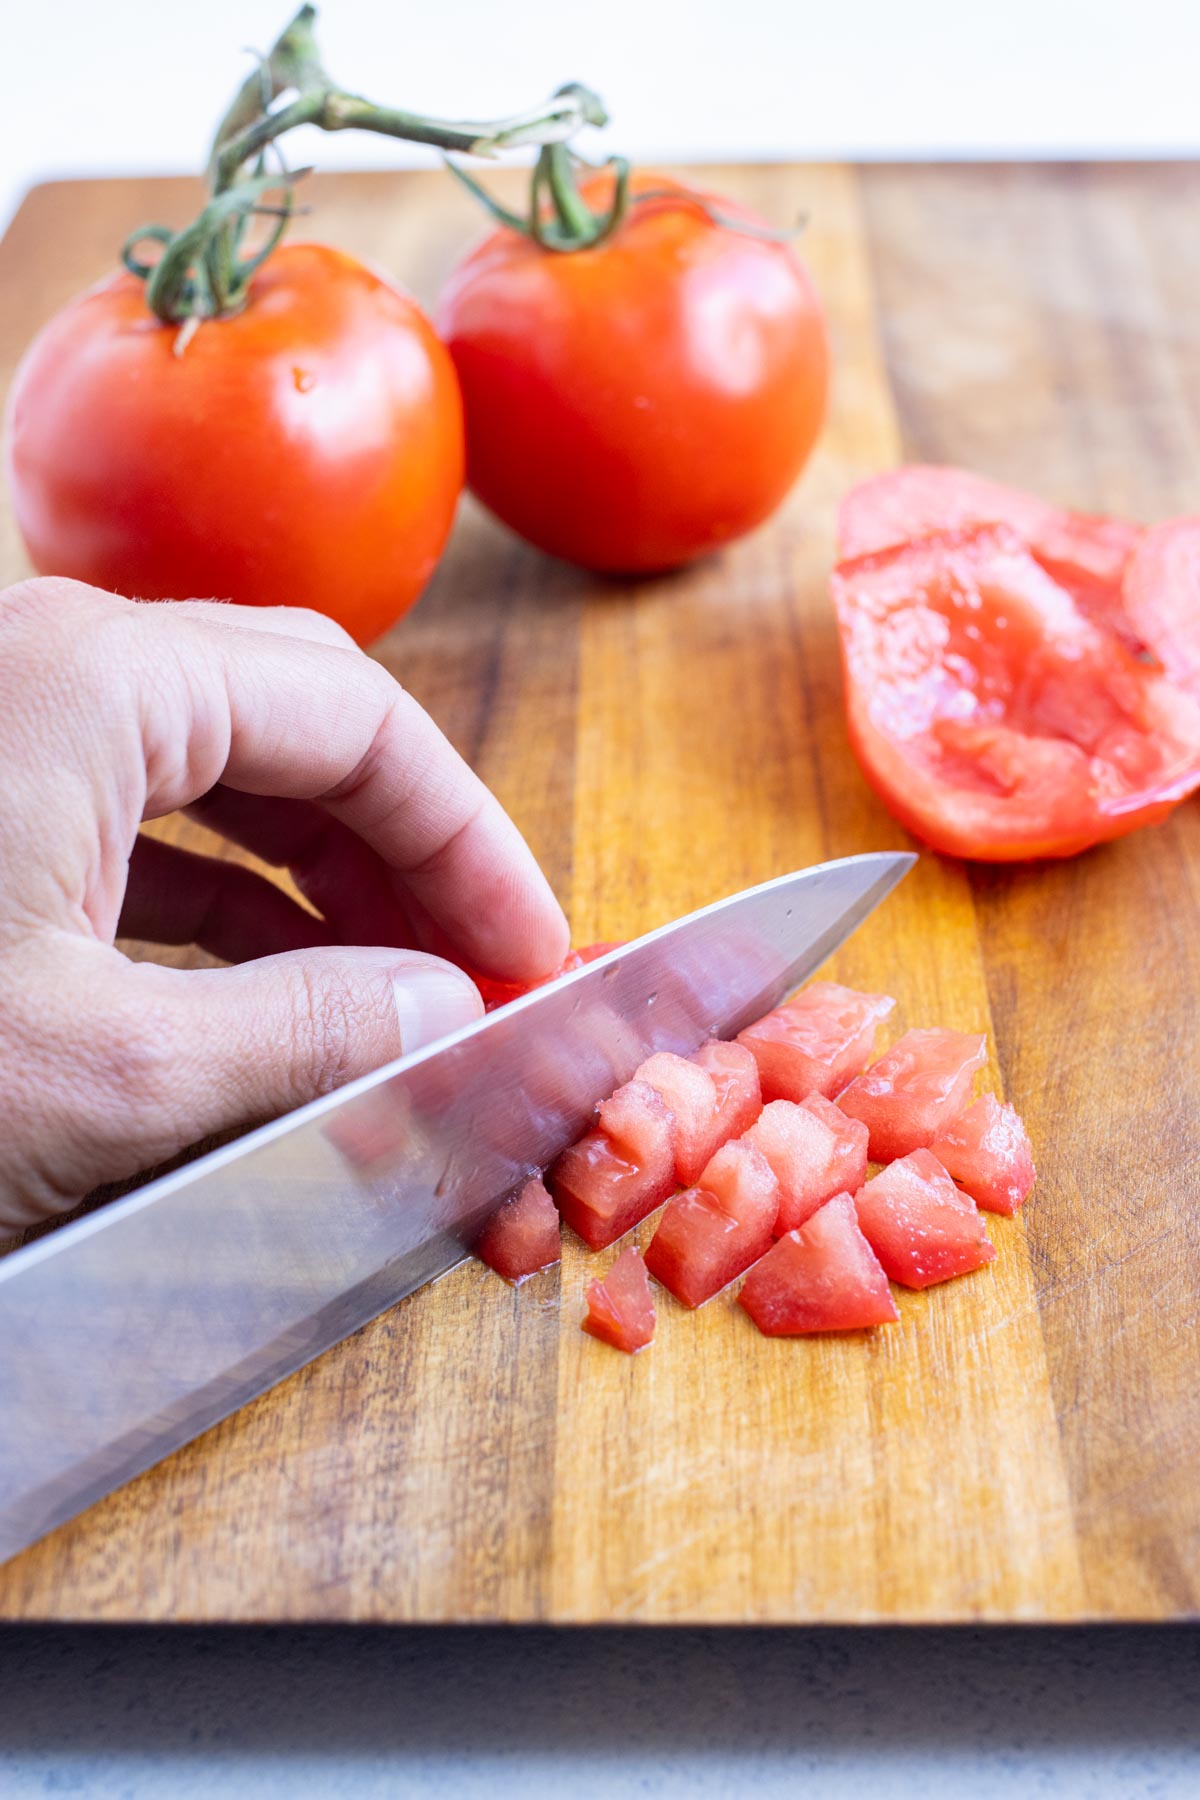 Tomato slices are cut into small cubes.